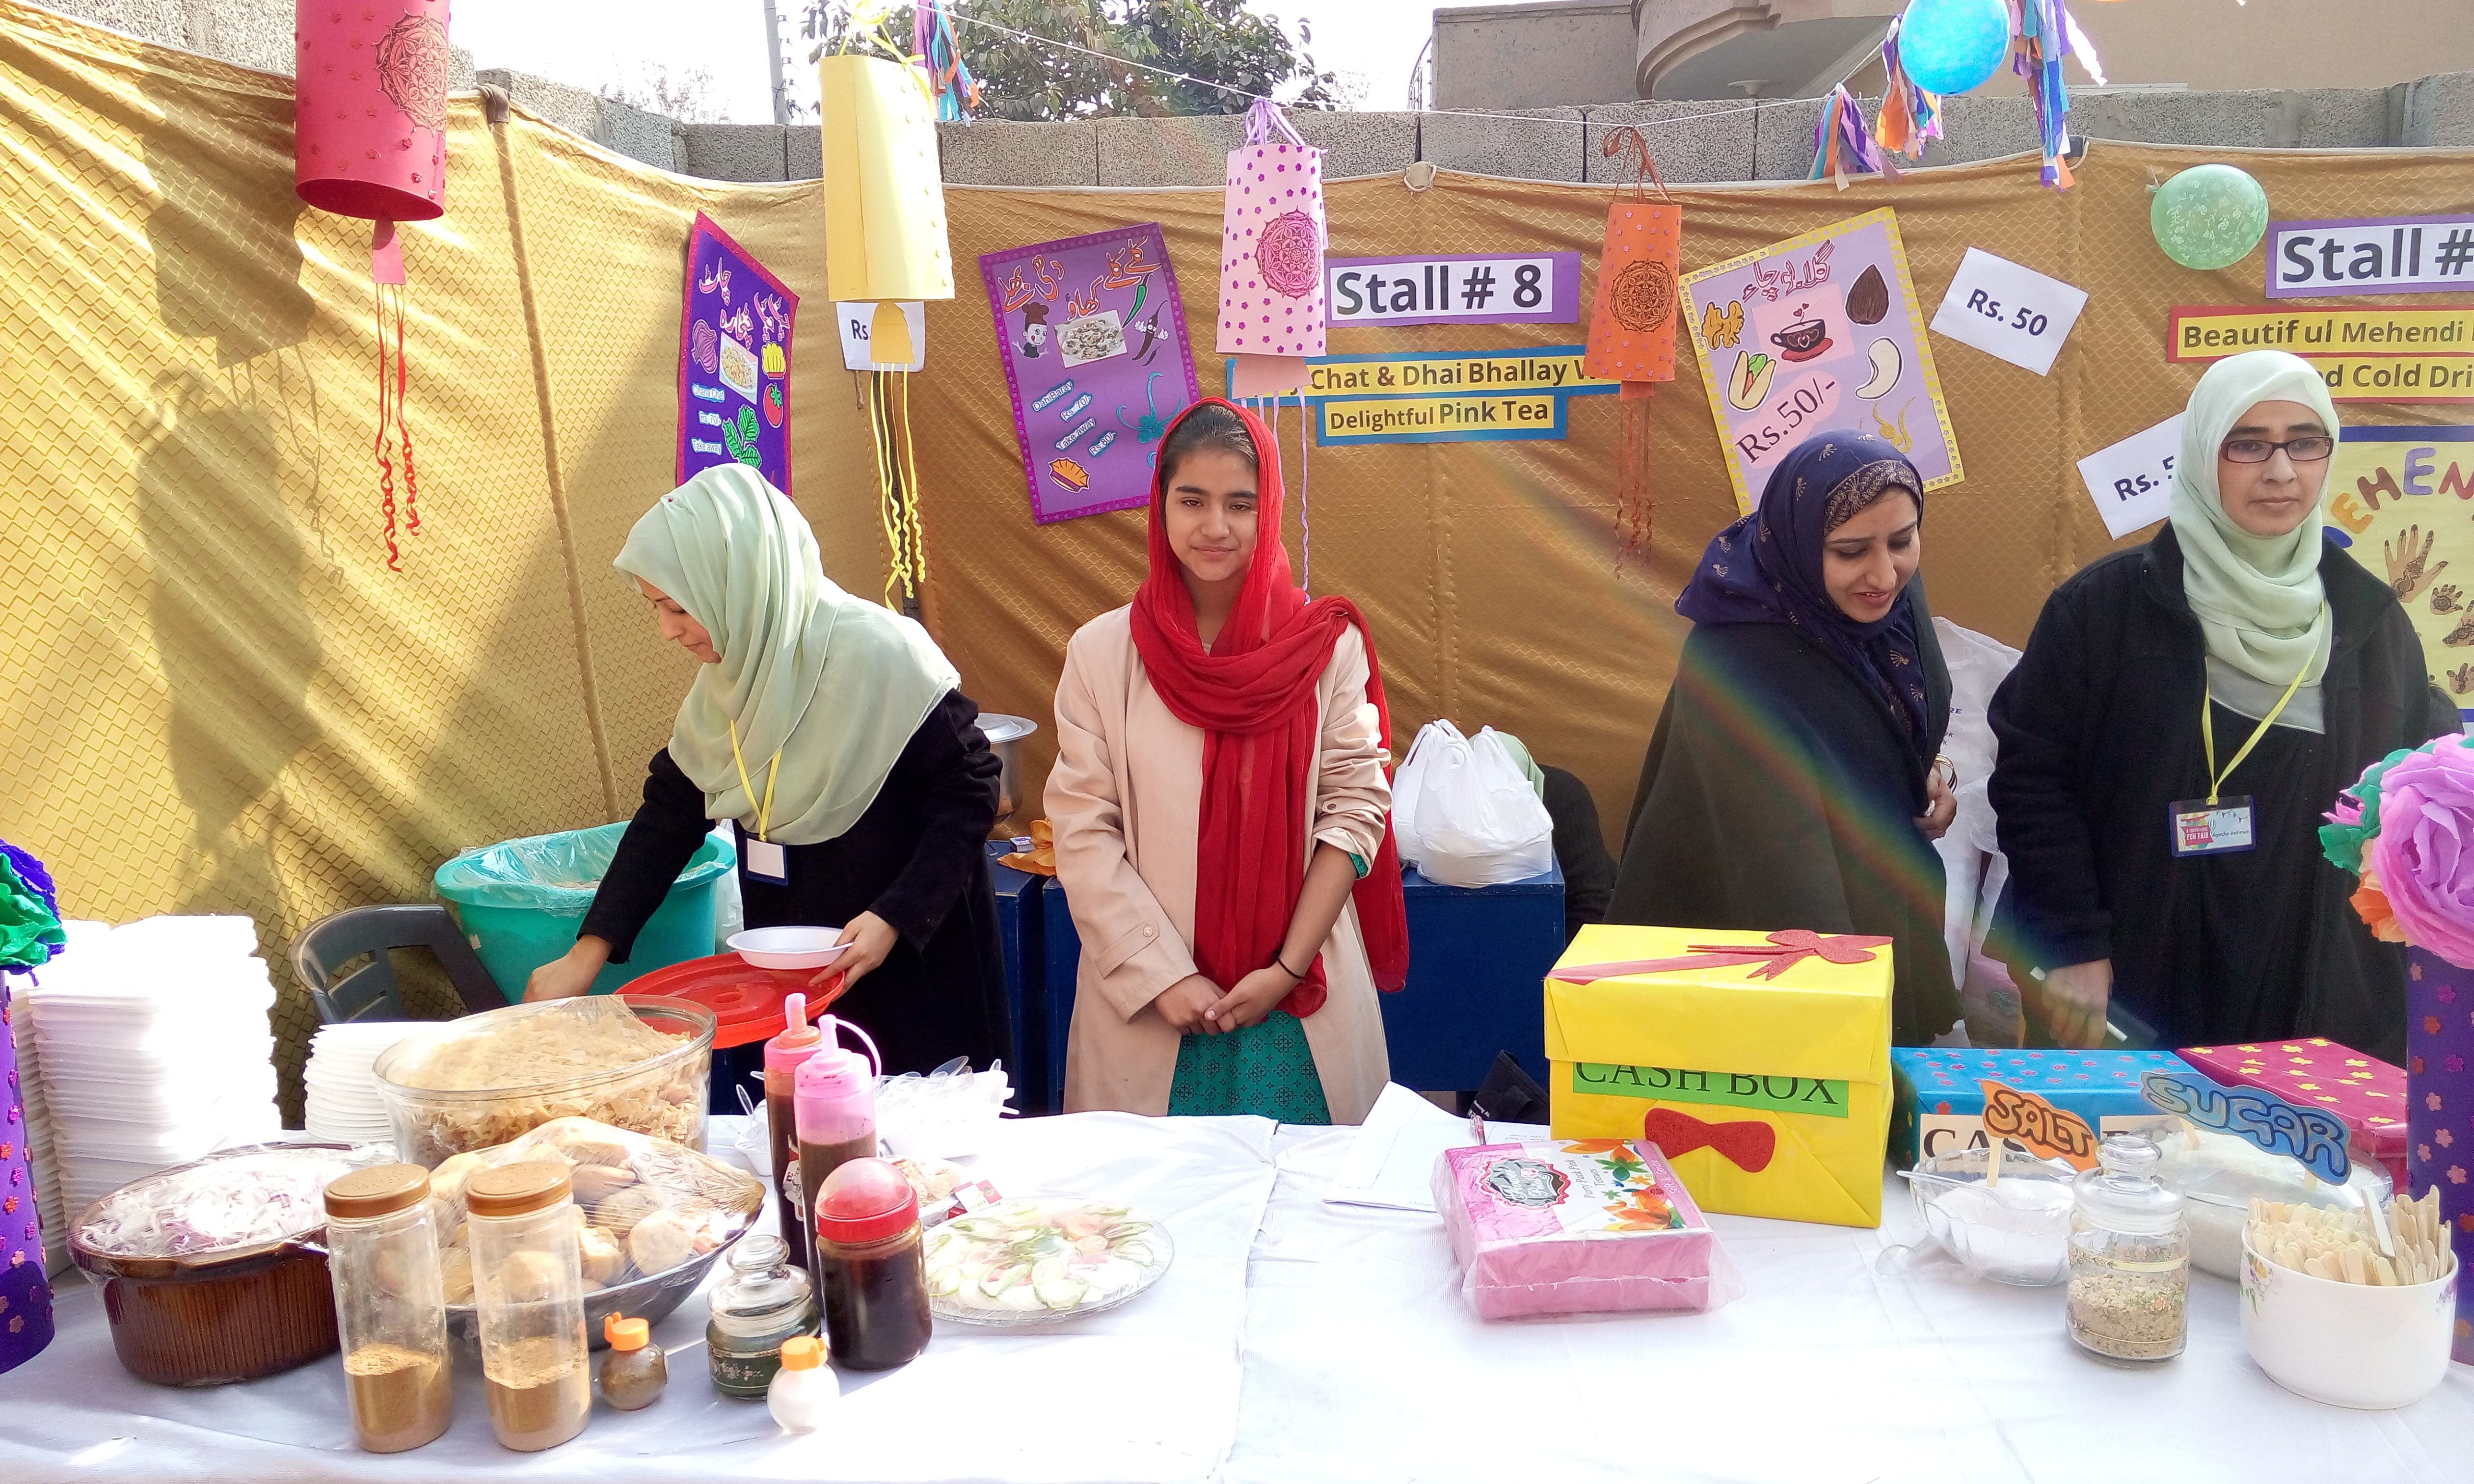 Stall 8 - Channa Chat, Dhai Bhallay & Delightful Pink Tea